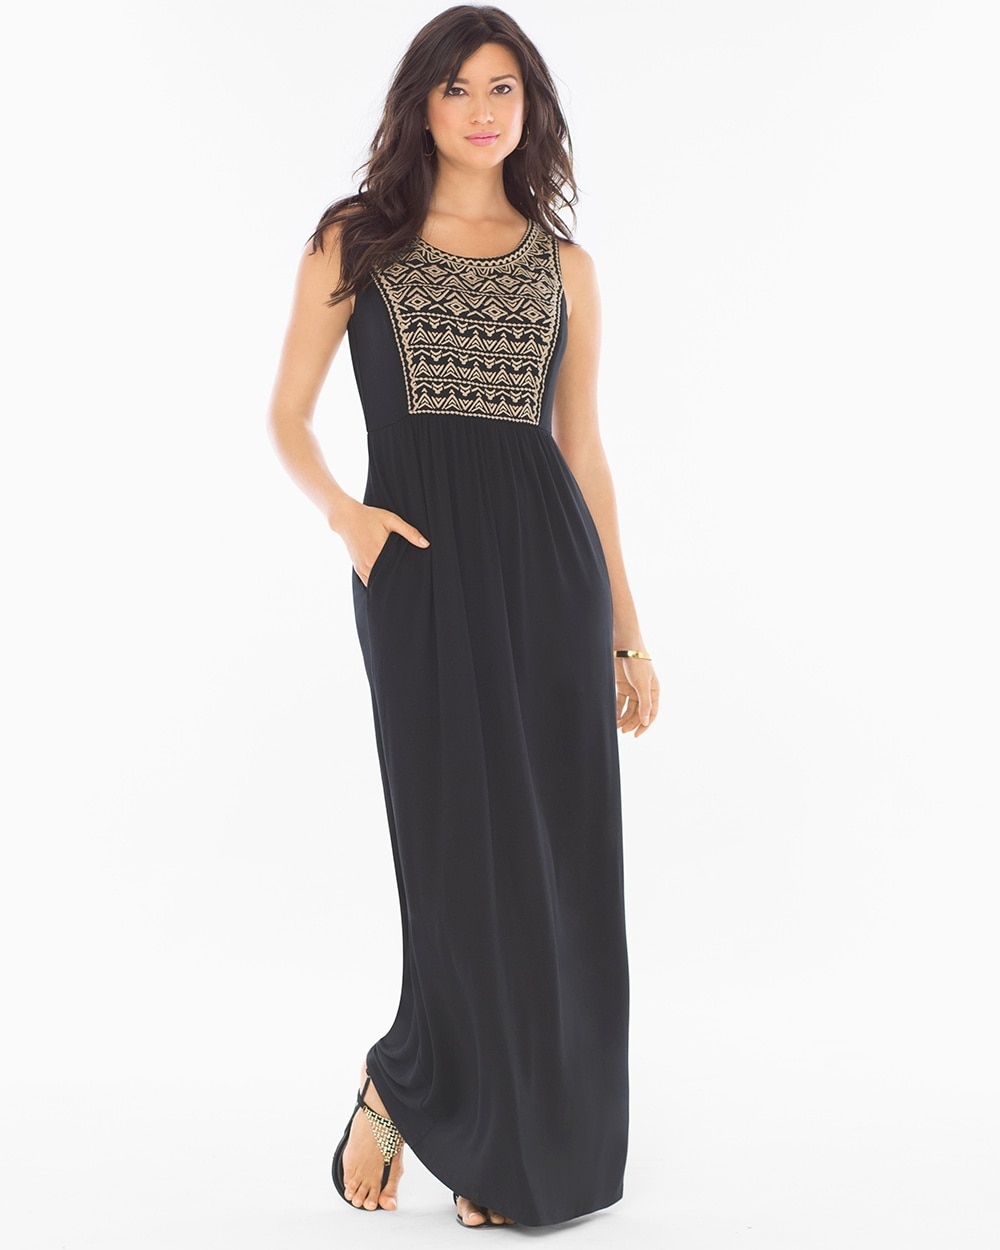 Embroidered Maxi Dress Black With Soft Tan Embroidery